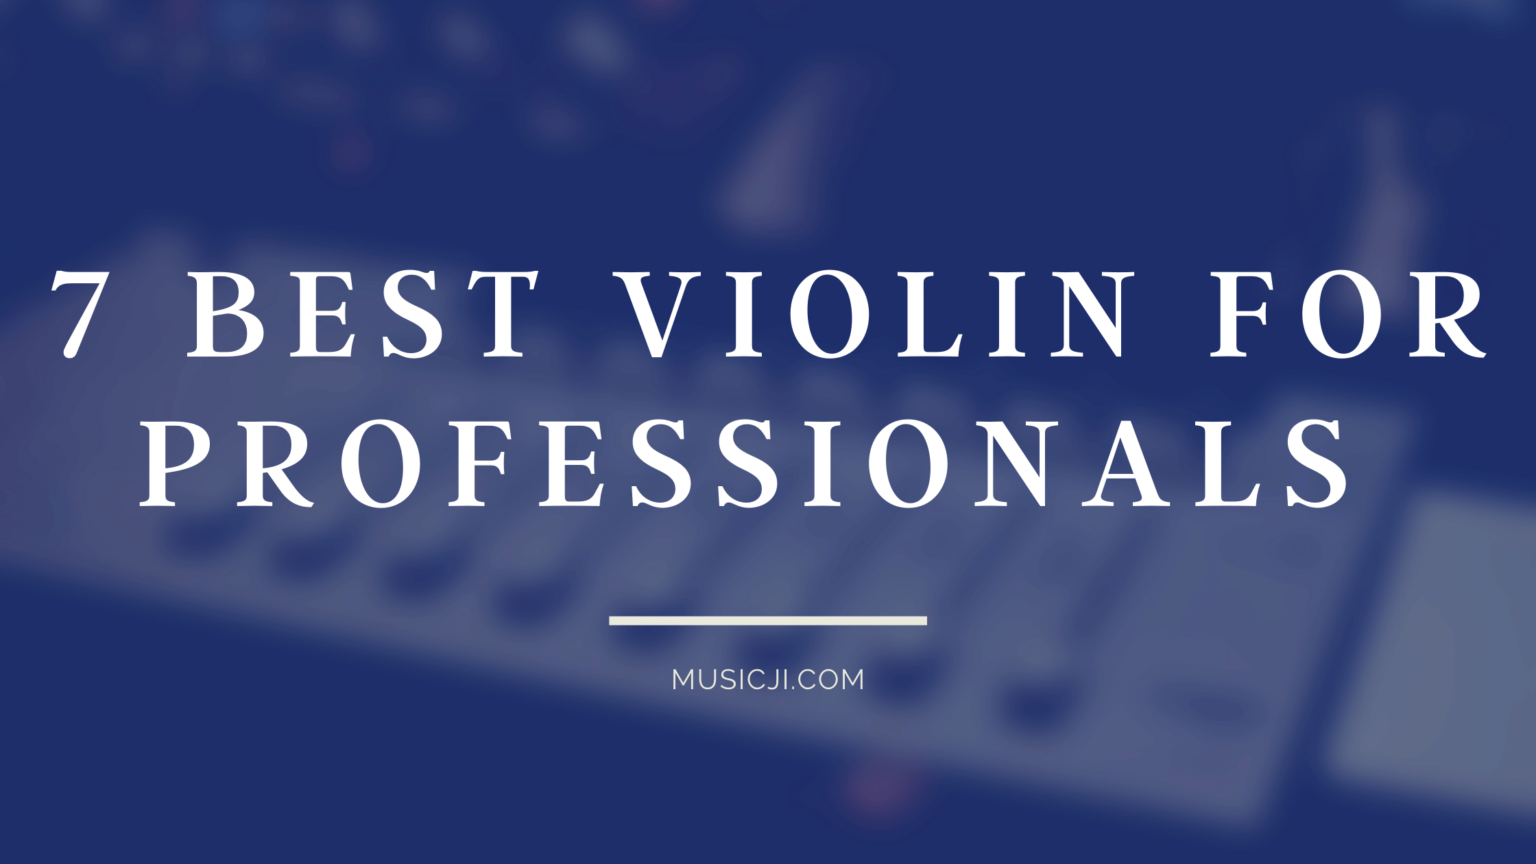 7 Best Violin for Professionals in India